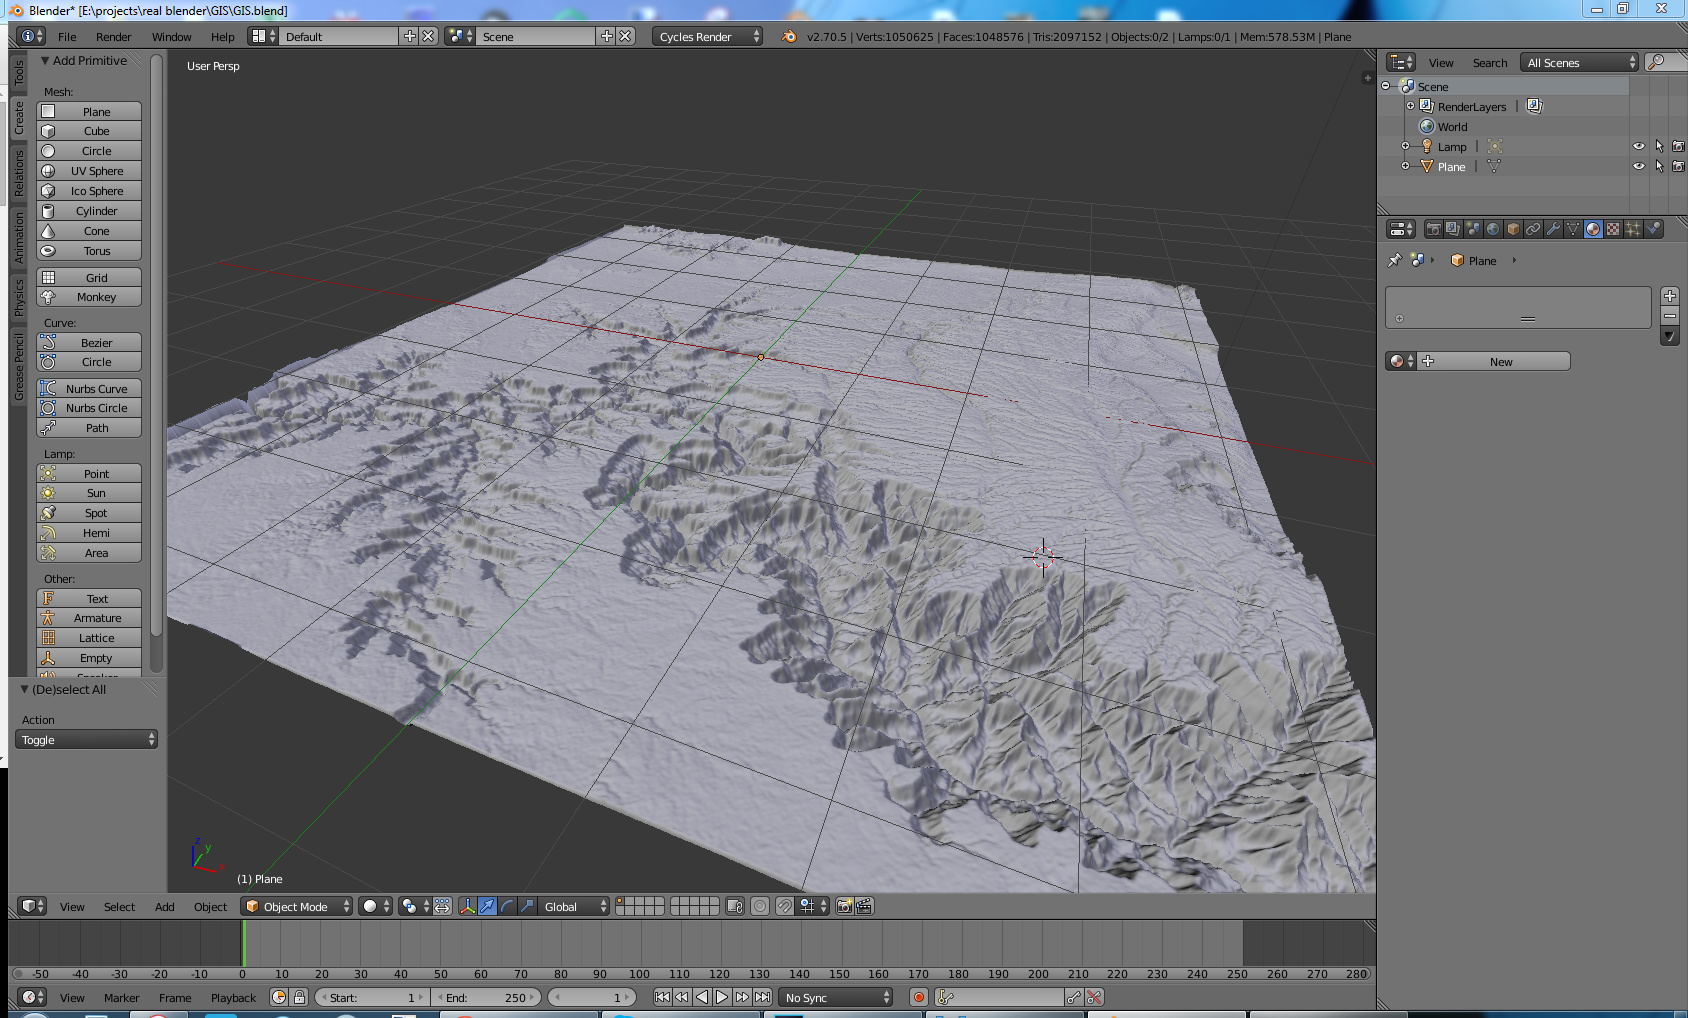 Awesome Way to Get Map Data Imported Into Blender - Blender Tests - Artists Community